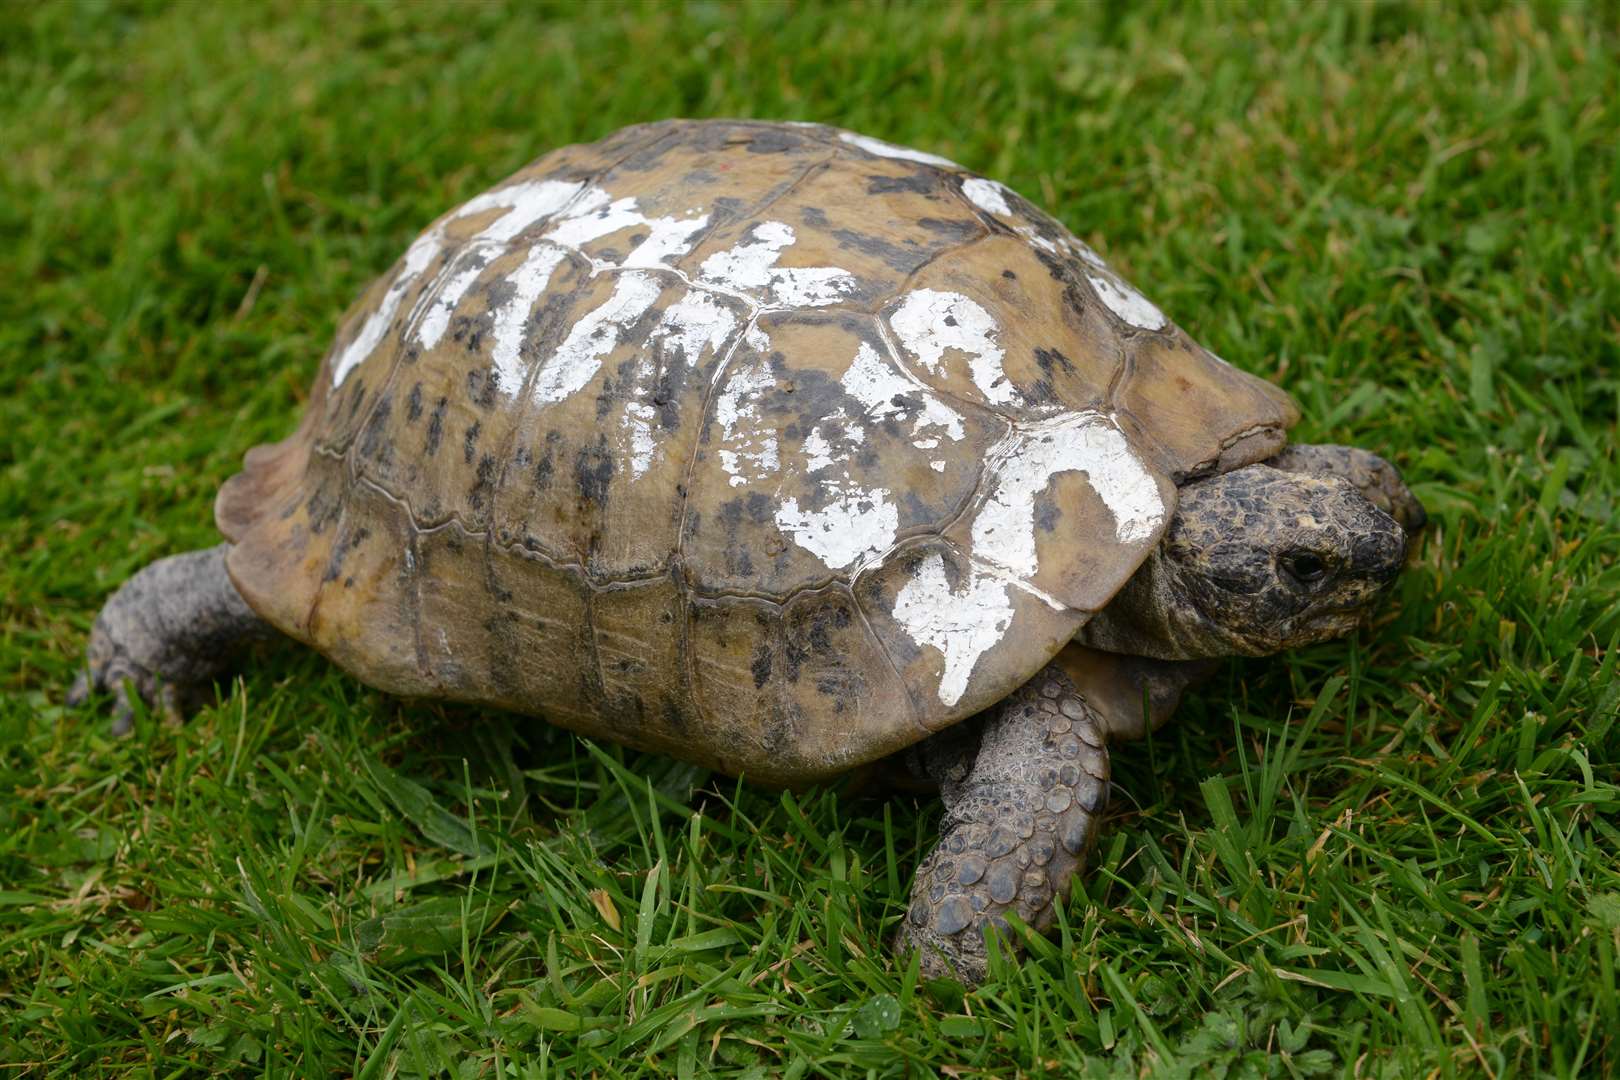 Toby the 109-year-old tortoise